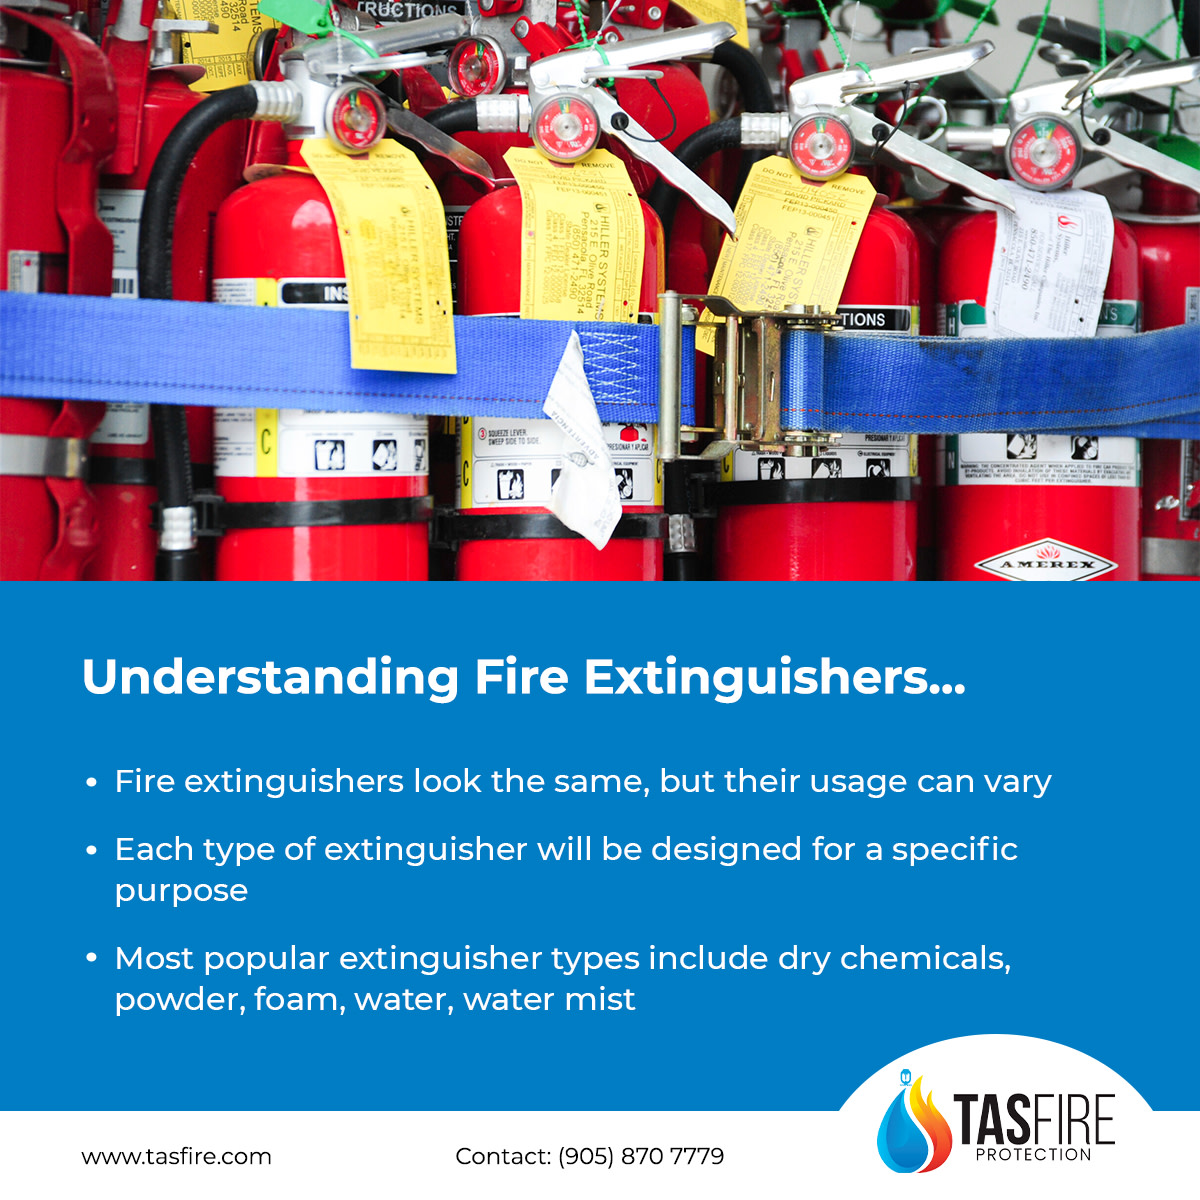 TAS Fire - Understanding Fire Extinguishers...
LEARN MORE... tasfire.com/type_a_fire_ex…

#fireextinguishers #fireprotection #fireservices #fireprotectionservices #weston
#florida #southflorida #fortlauderdale